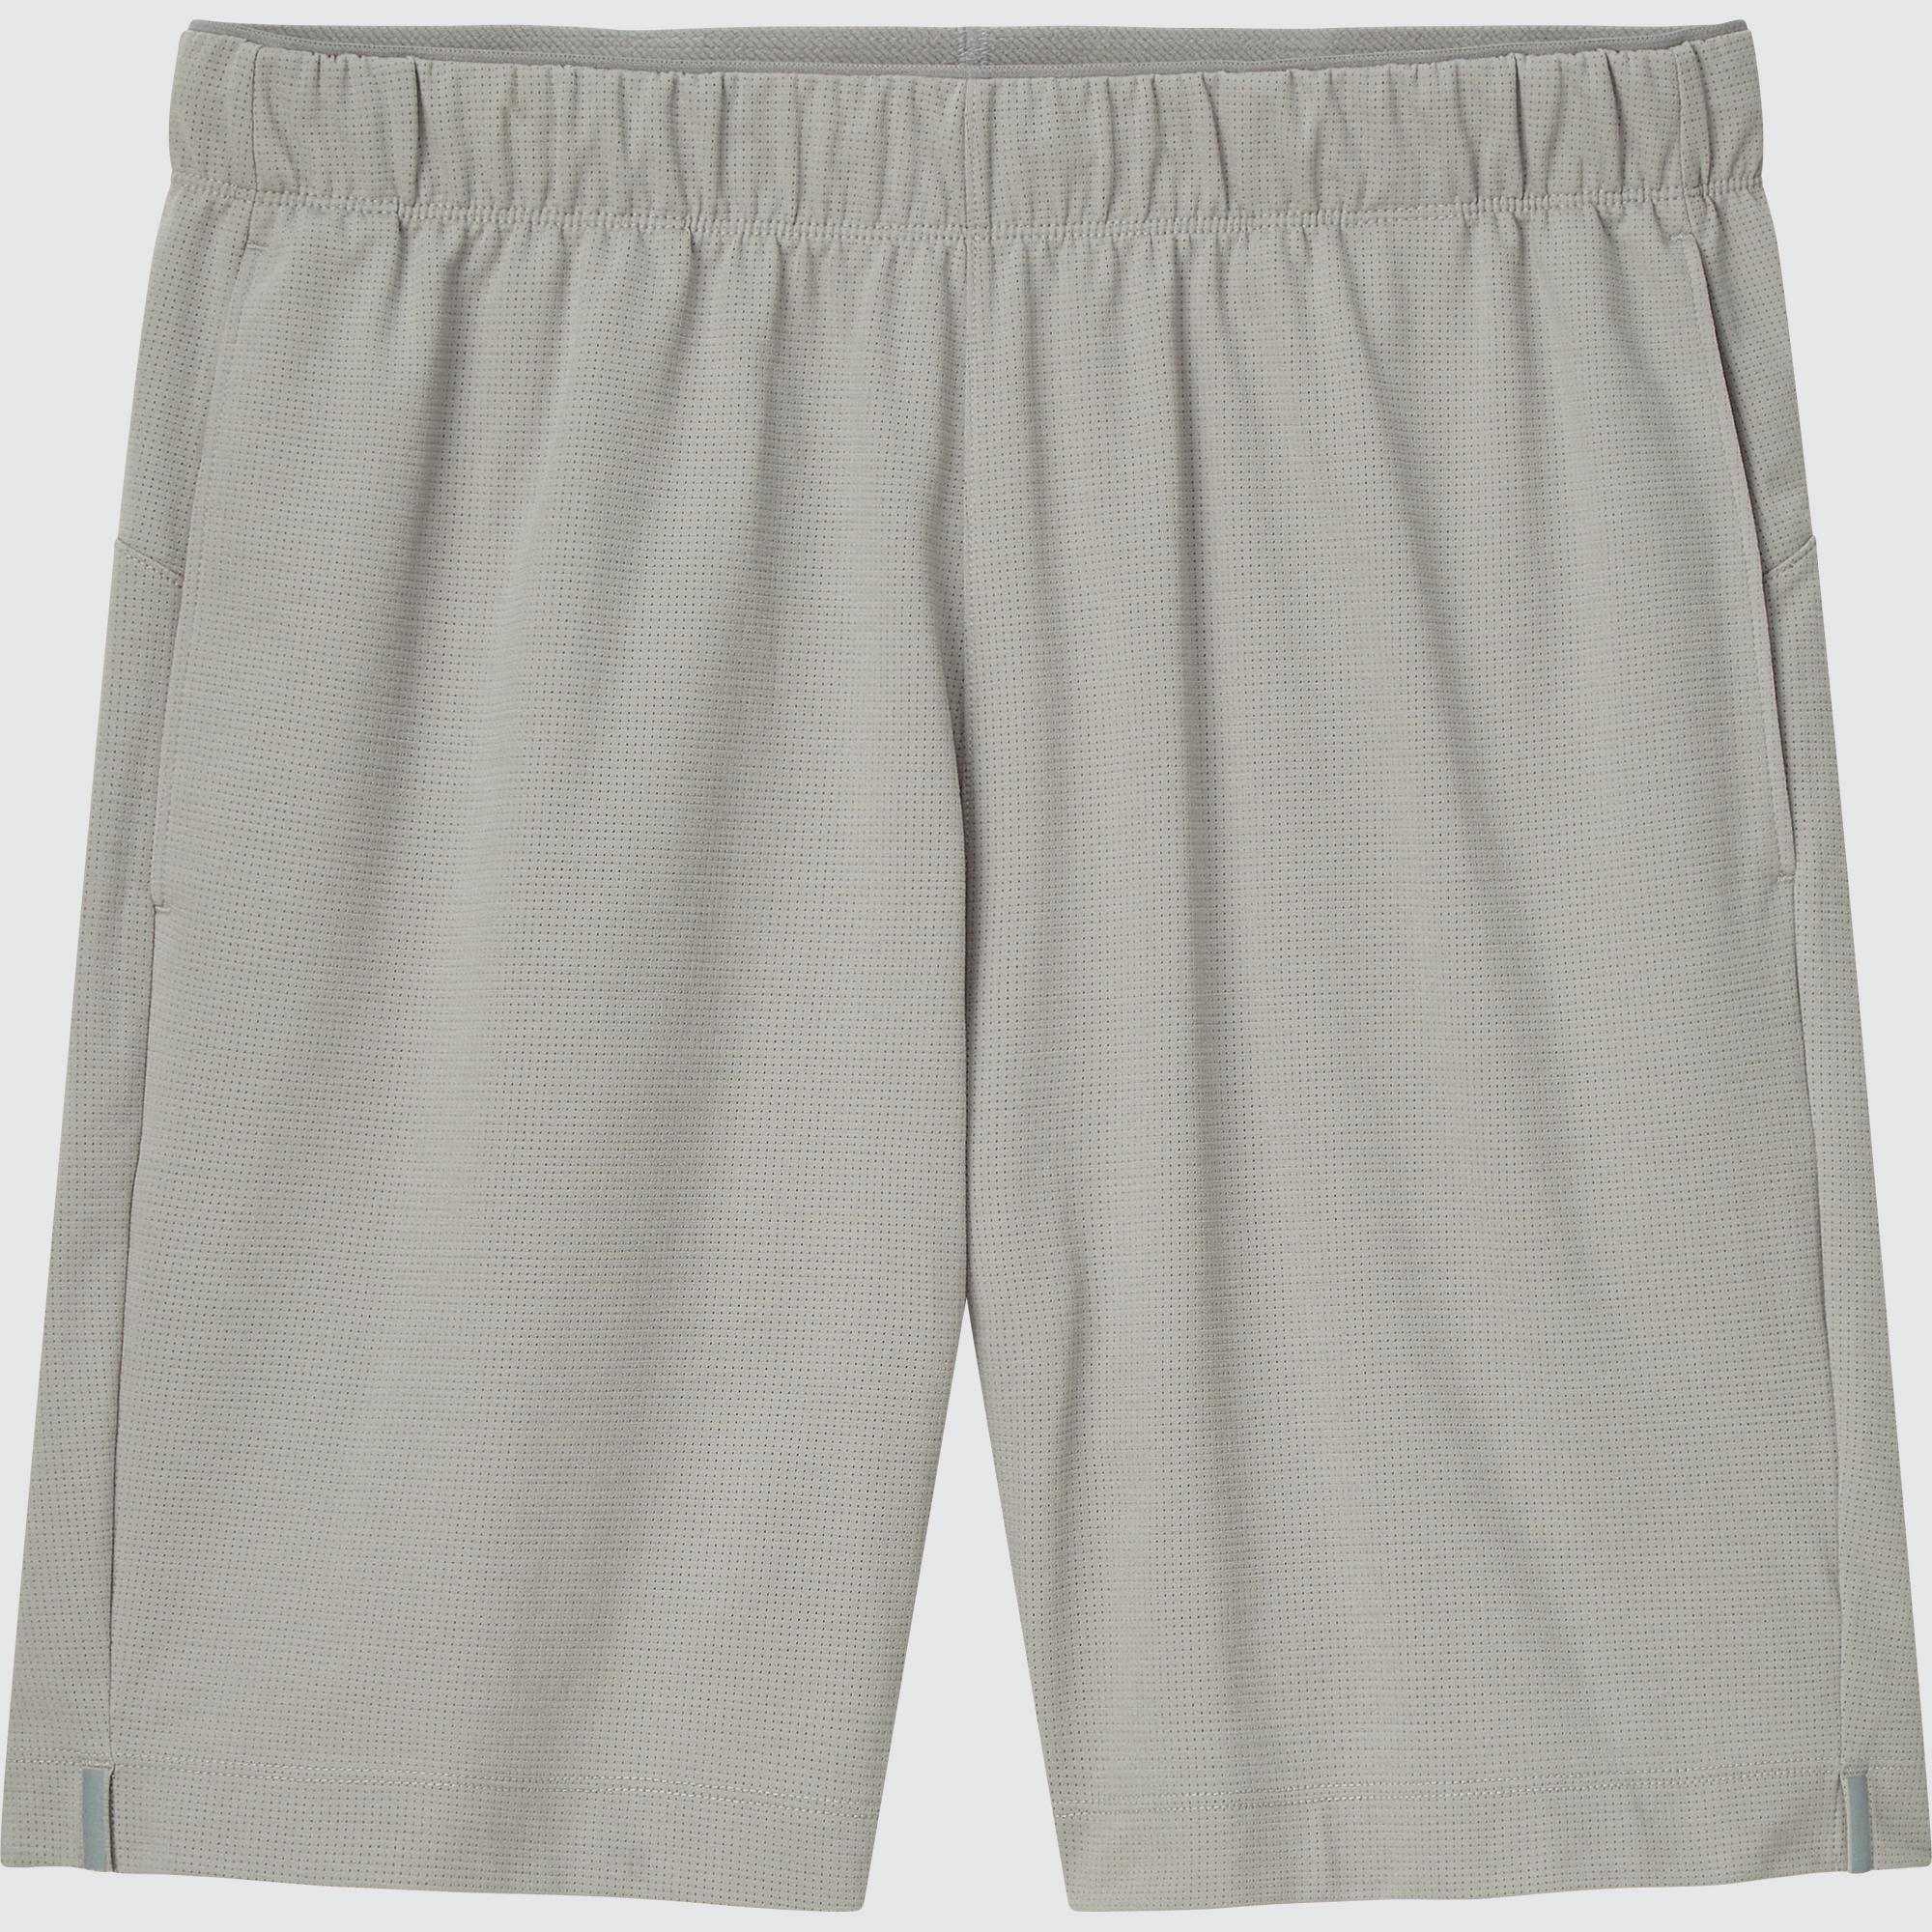 Check styling ideas for「Ultra Stretch Active Shorts (7)」